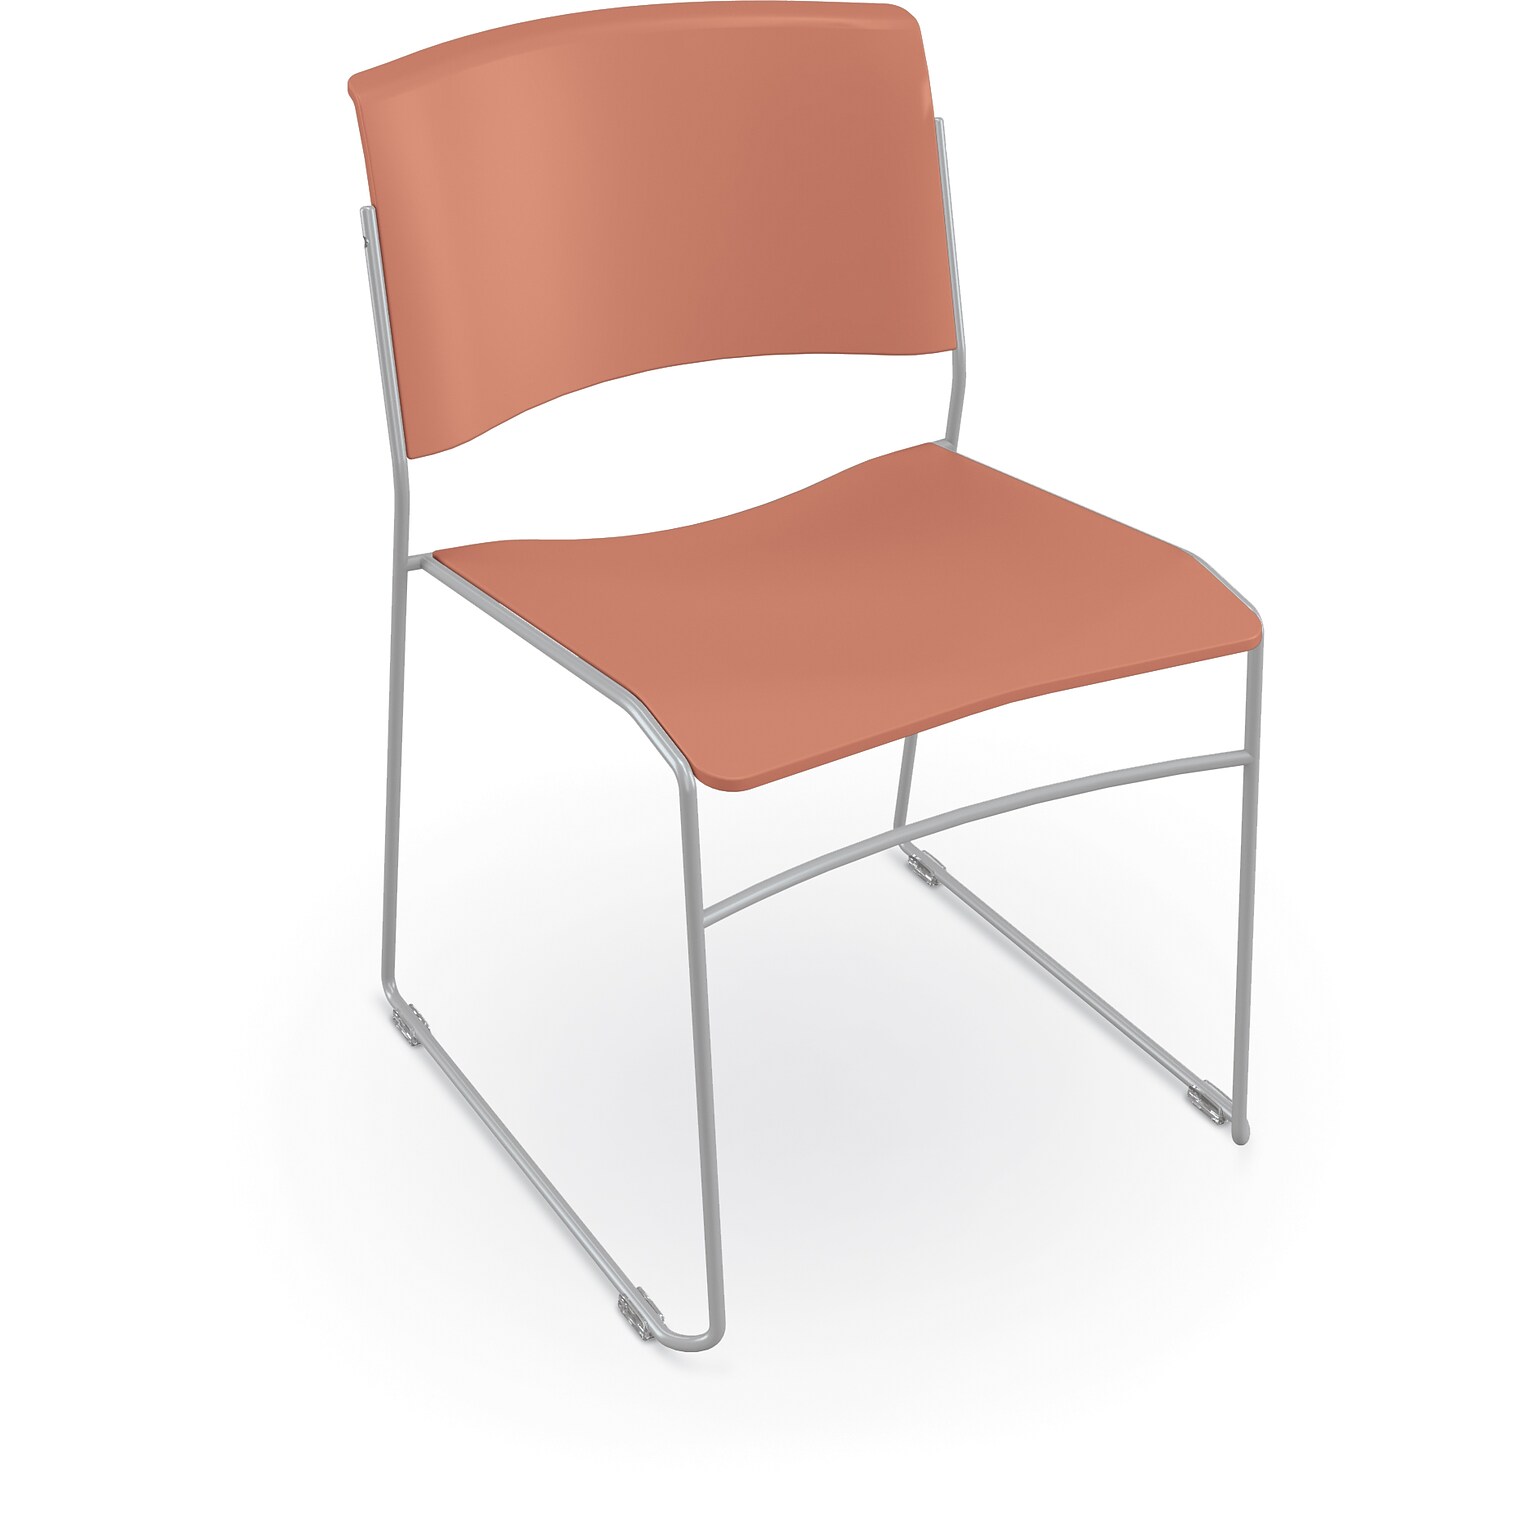 MooreCo Akt Stacking Student Chair, Cayenne (56577-CAYENNE)